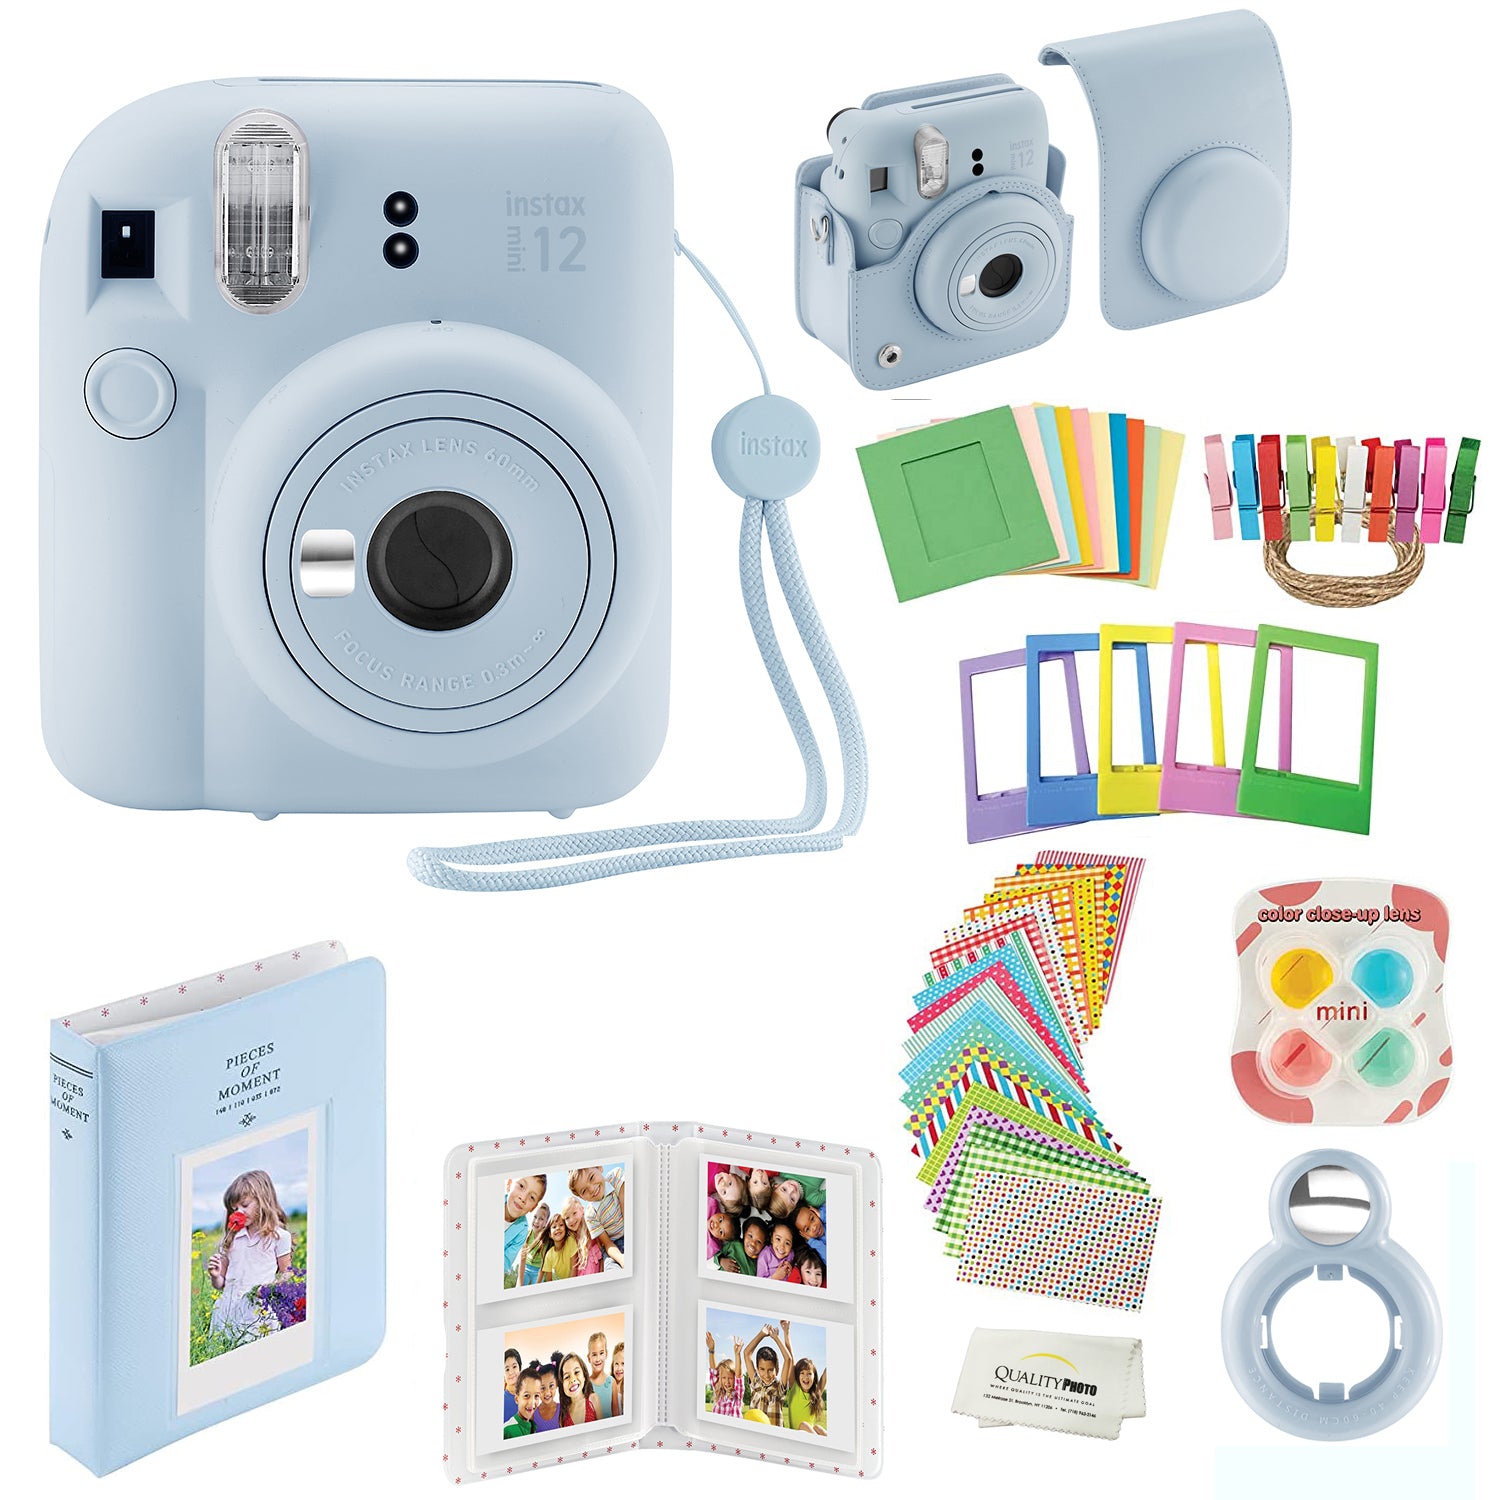 Fujifilm Instax Mini 12 Instant Camera with Case, Decoration Stickers, Frames, Photo Album and More Accessory kit (Pastel Blue)